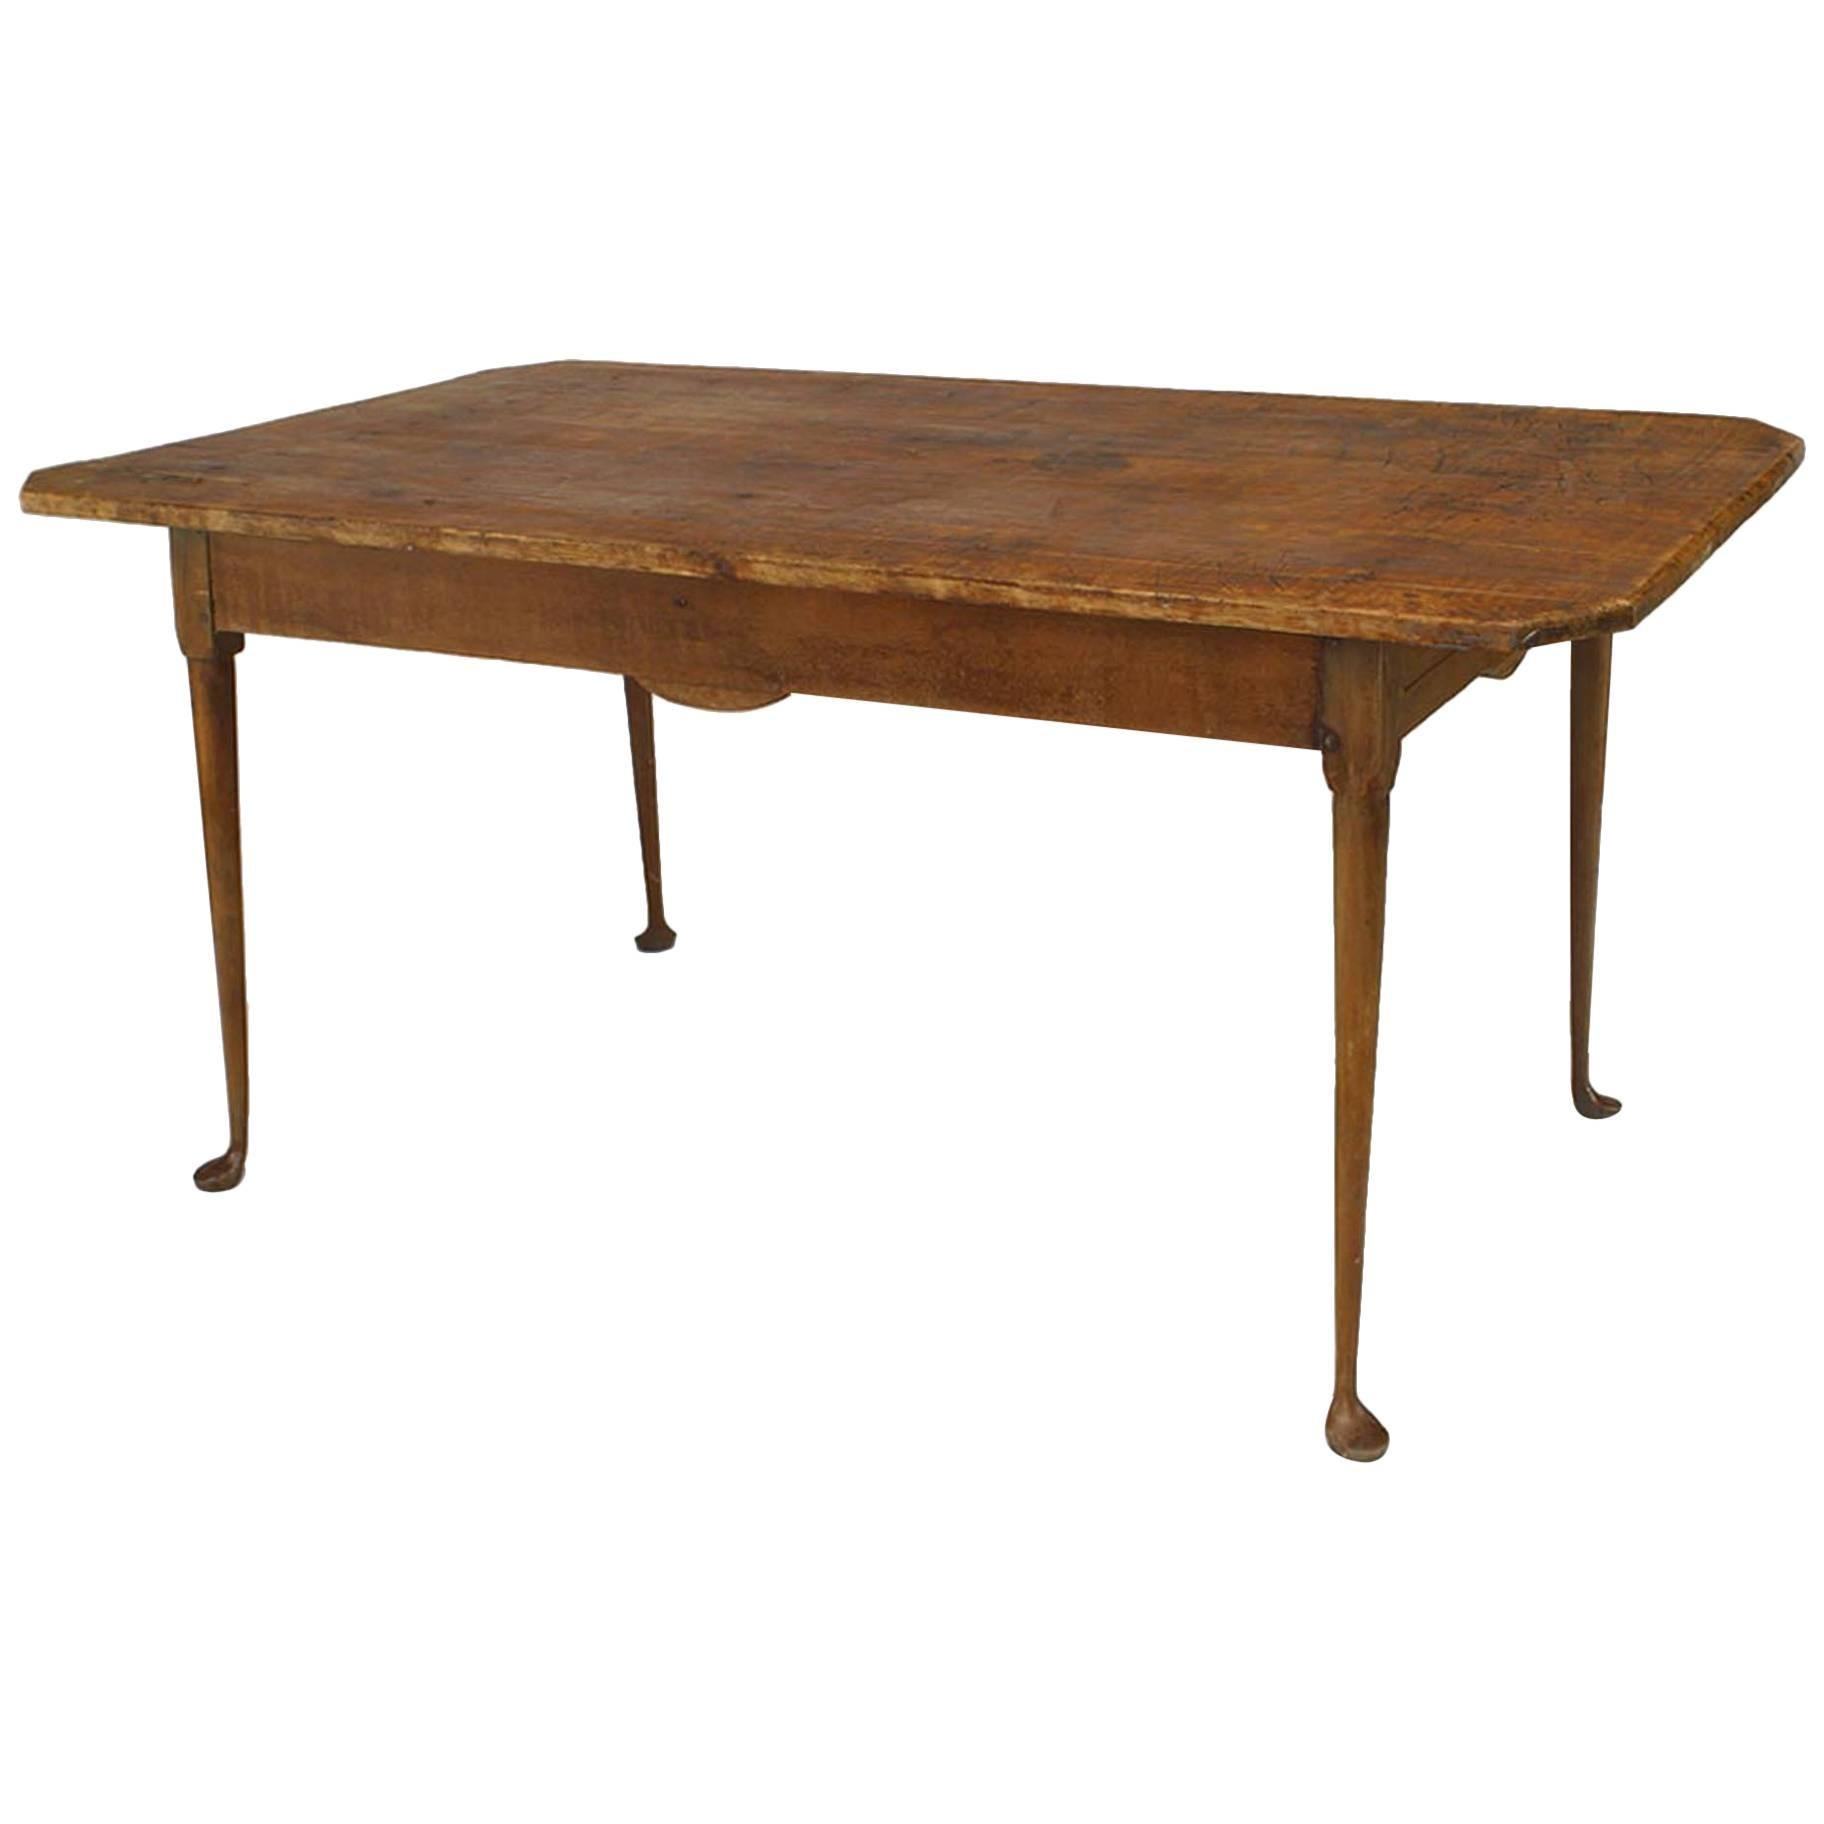 18th Century American Queen Anne Pine Dining Table from North Carolina Region 